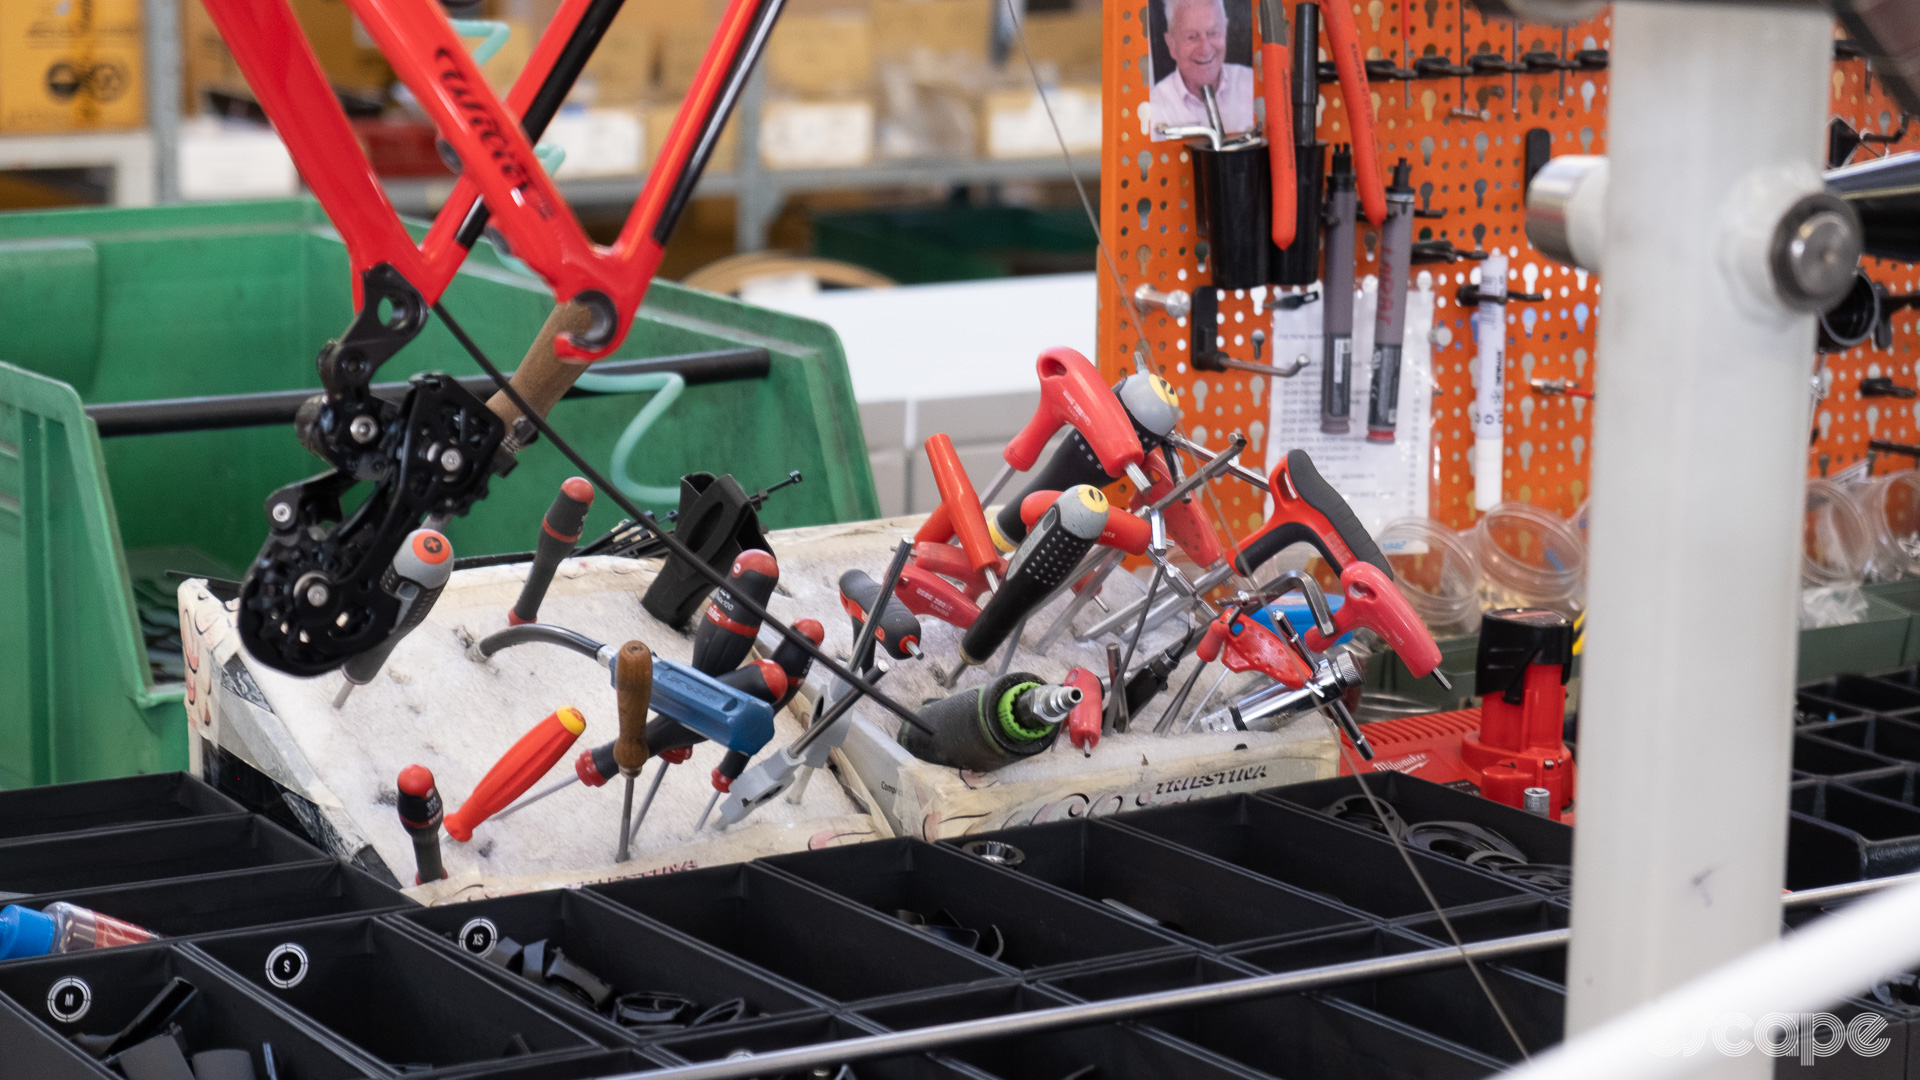 The photo shows some tools stuck into some polystyrene foam at a station on Wilier's assembly line 